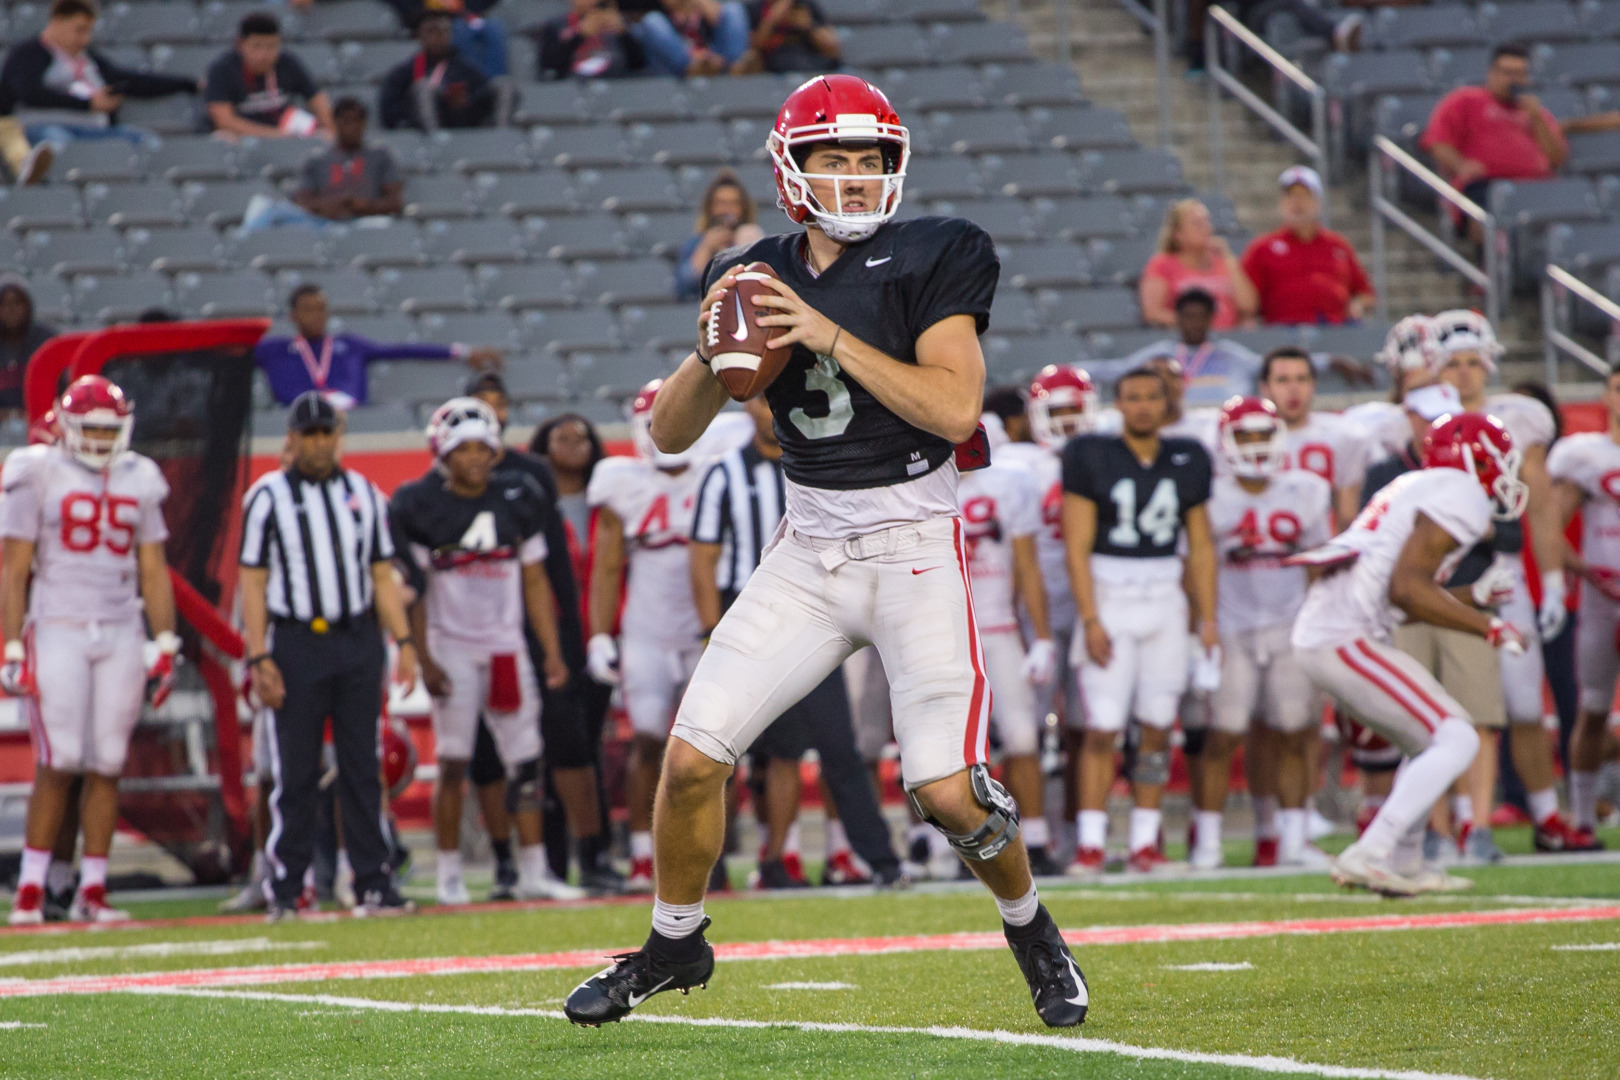 Sophomore quarterback Clayton Tune made his first start of the season for the Cougars in the 46-25 win. | Trevor Nolley/The Cougar